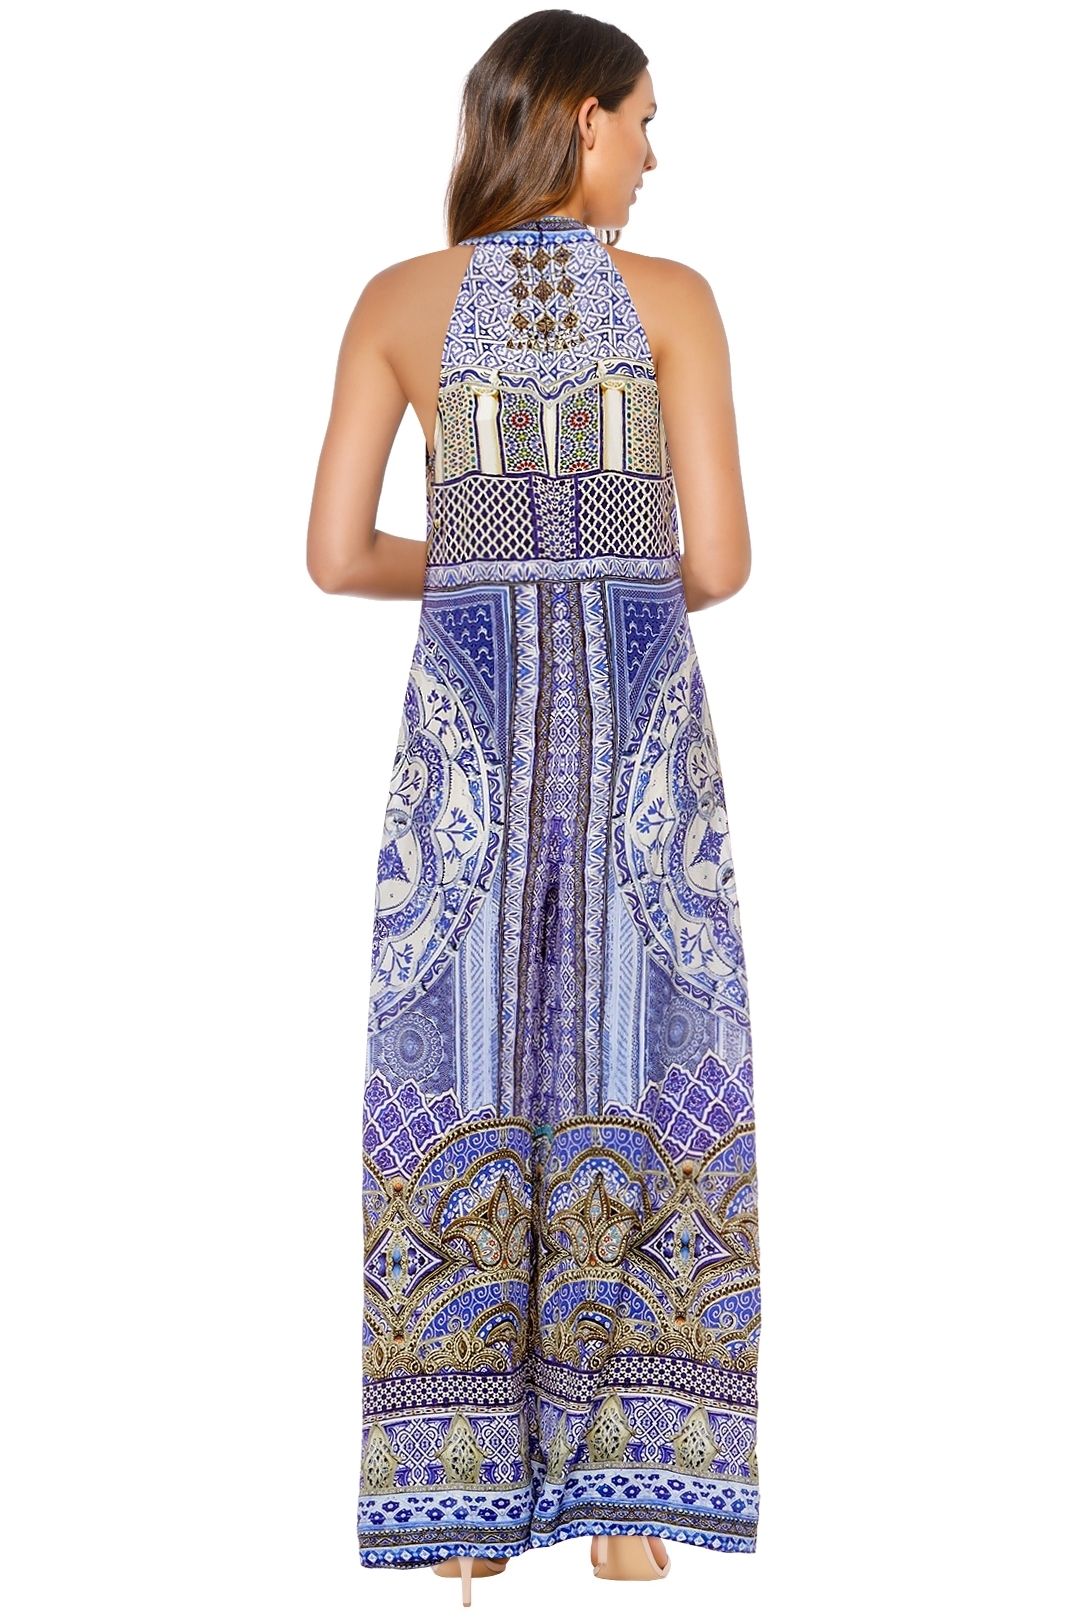 Camilla - It Was All A Dream Keyhole Front Jumpsuit - Prints - Back